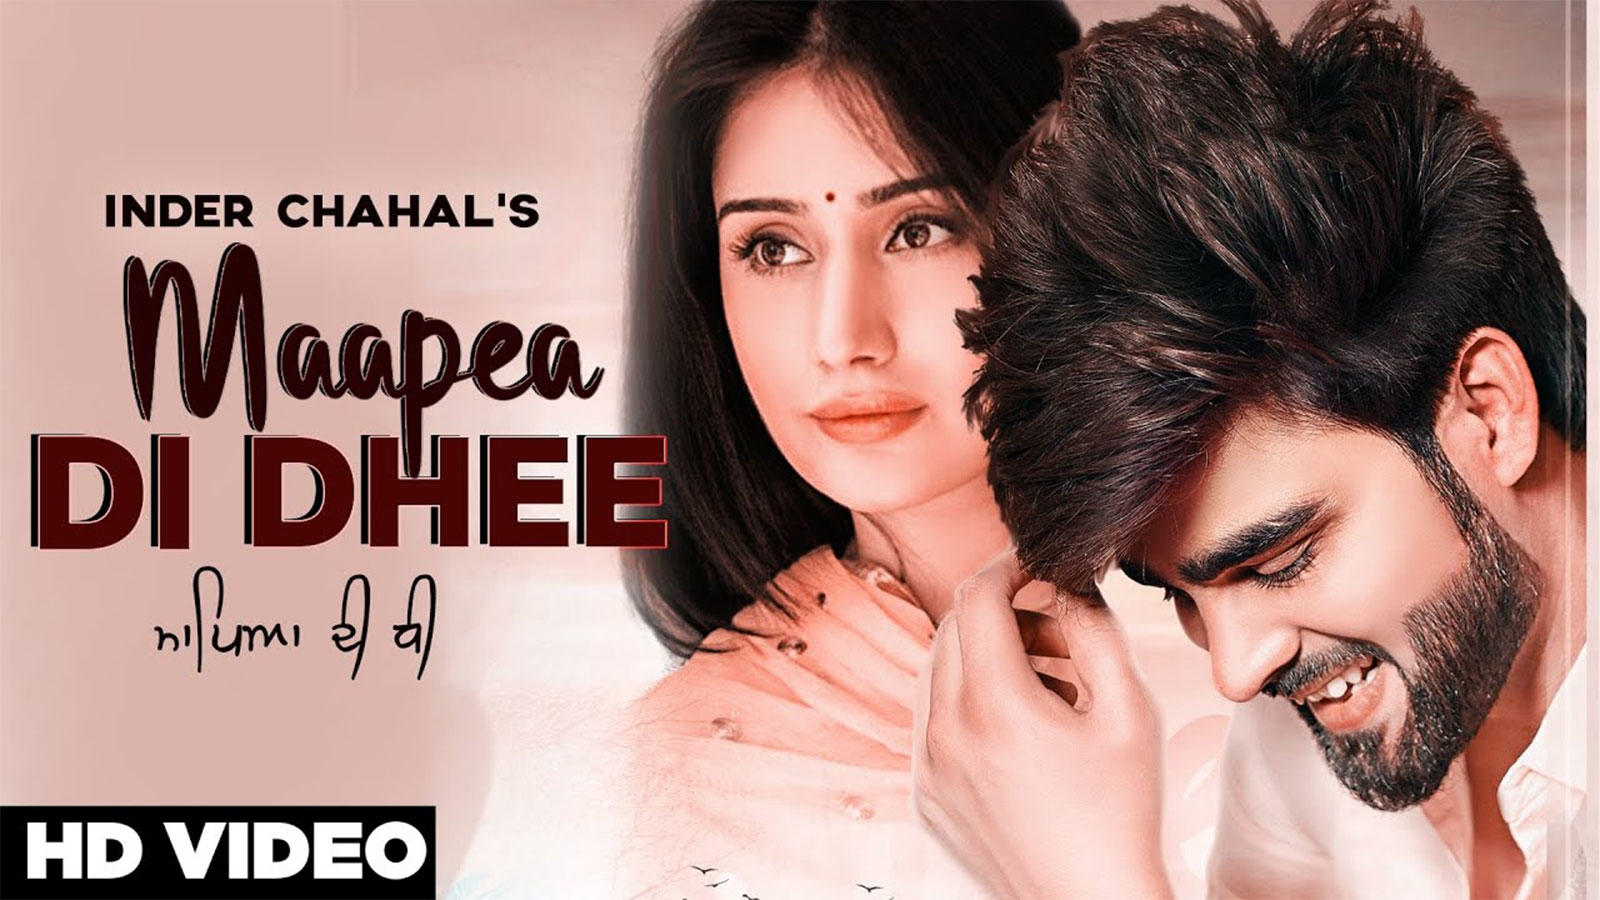 Latest Punjabi Song Maapea Di Dhee Sung By Inder Chahal Punjabi Video Songs Times Of India